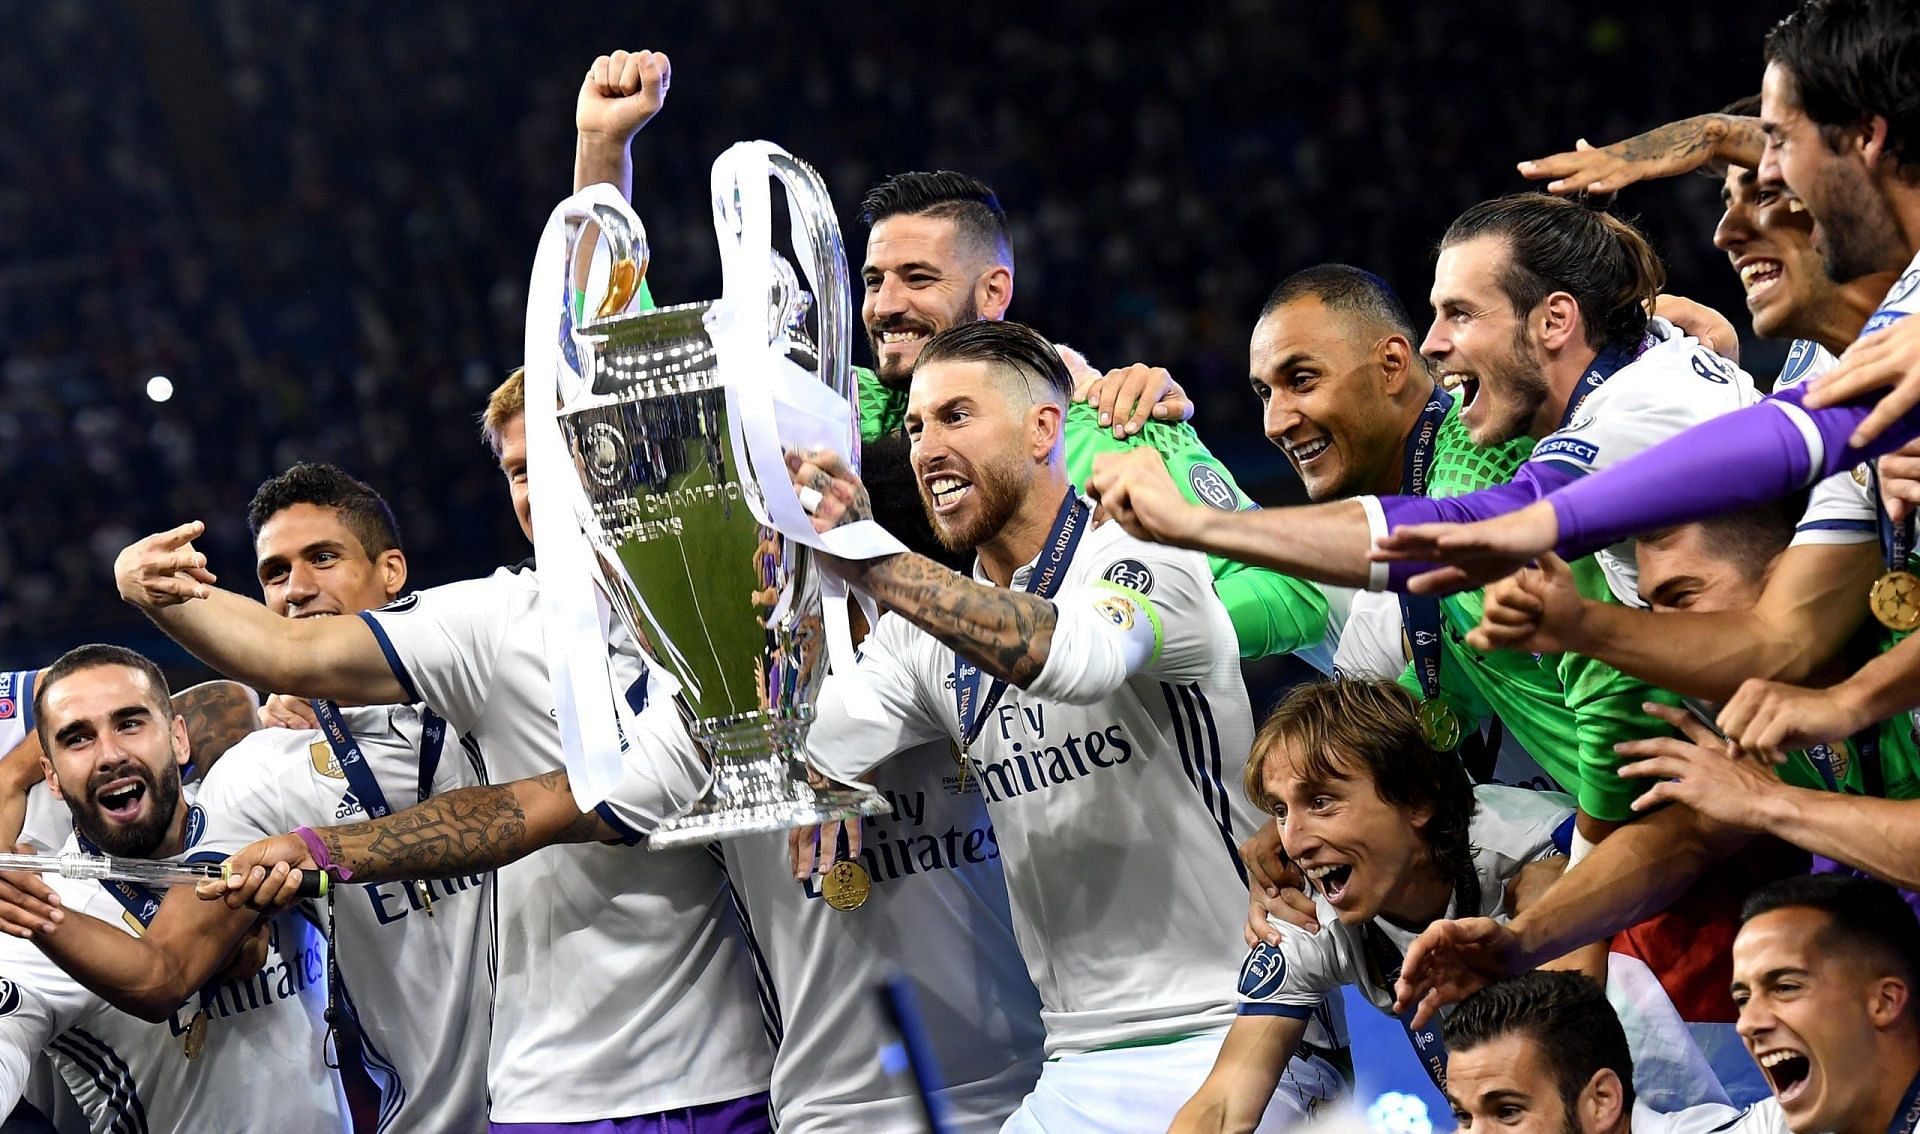 Real Madrid captain Sergio Ramos leads the celebrations after winning the Champions League.